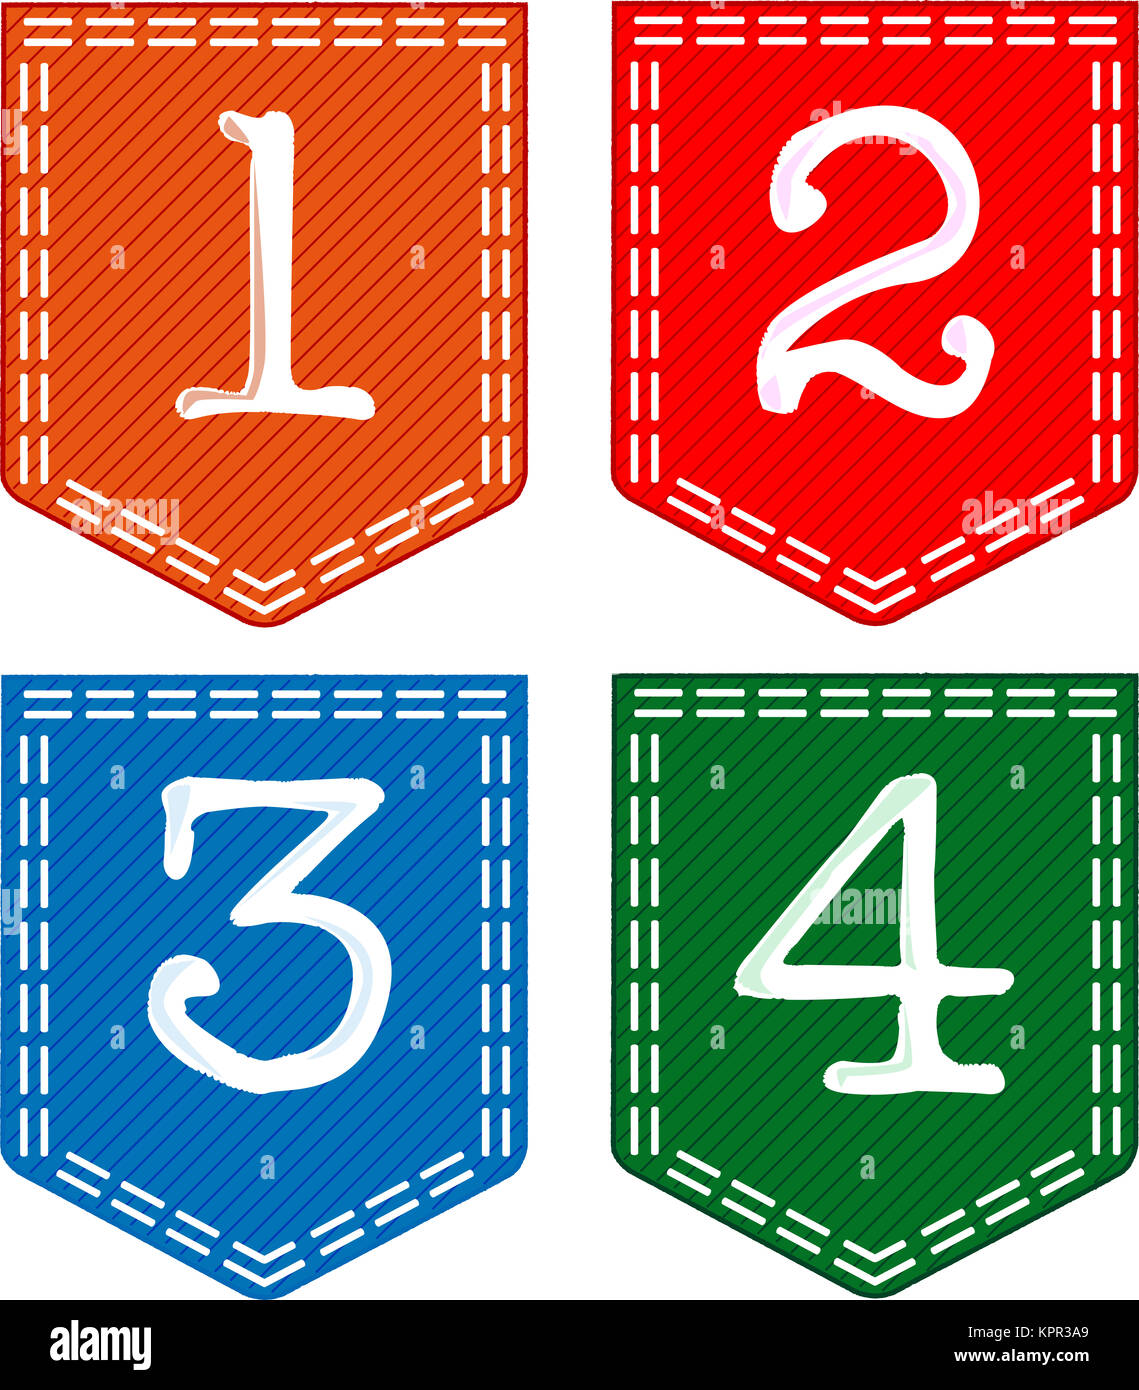 Icons Numbers 1, 2, 3 (one, Two, Three) Isolated On White Background, Three-dimensional  Rendering Stock Photo, Picture and Royalty Free Image. Image 38920335.